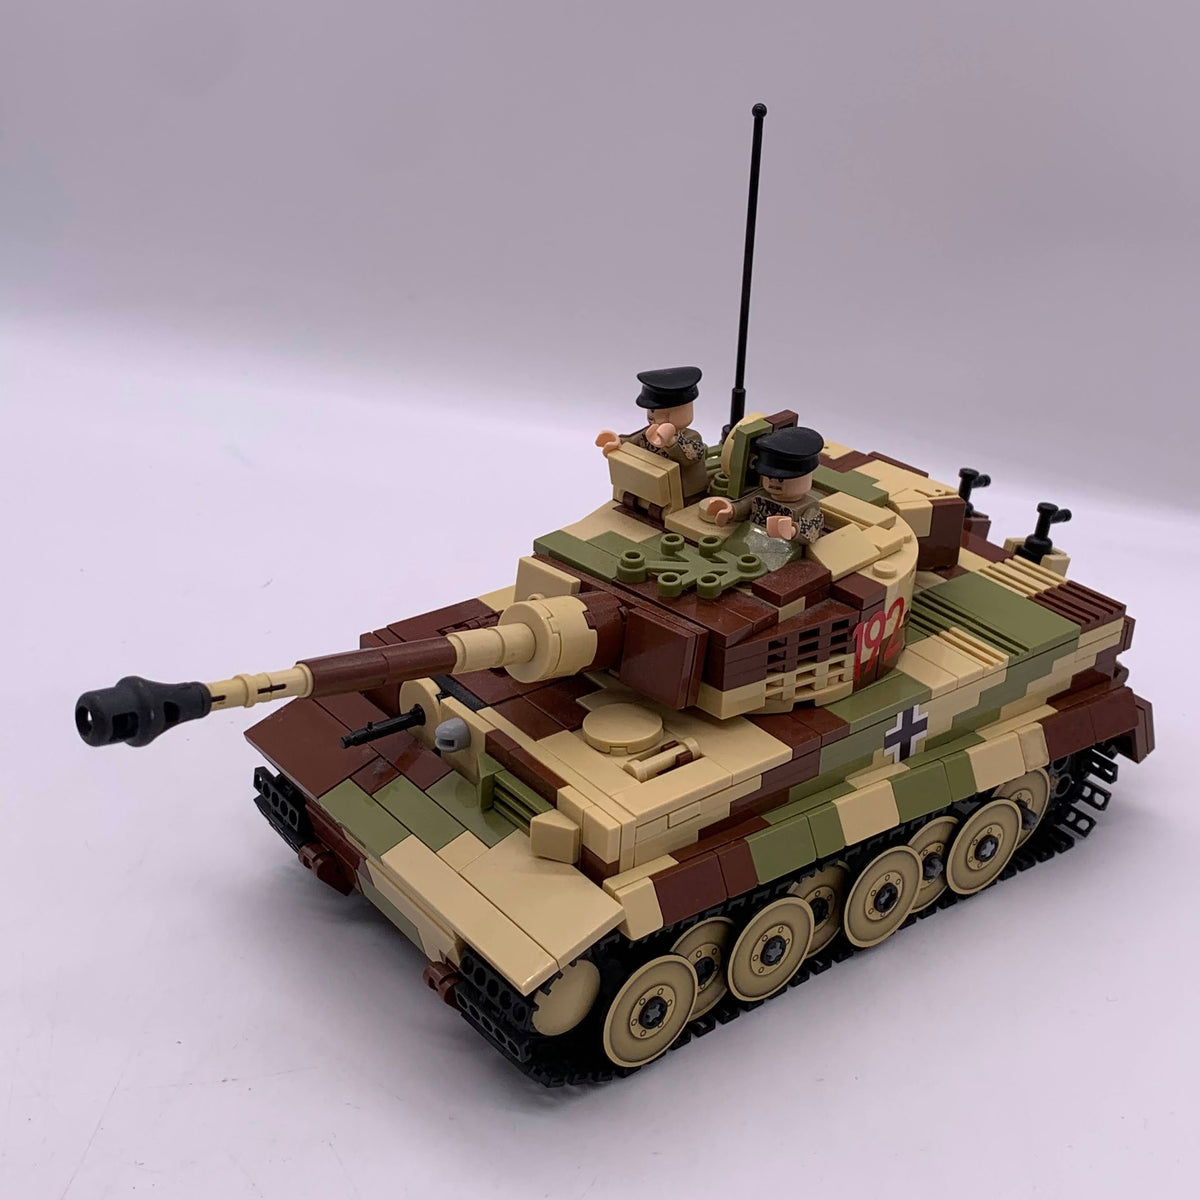 My dad has been working on this LEGO tiger tank. This is the